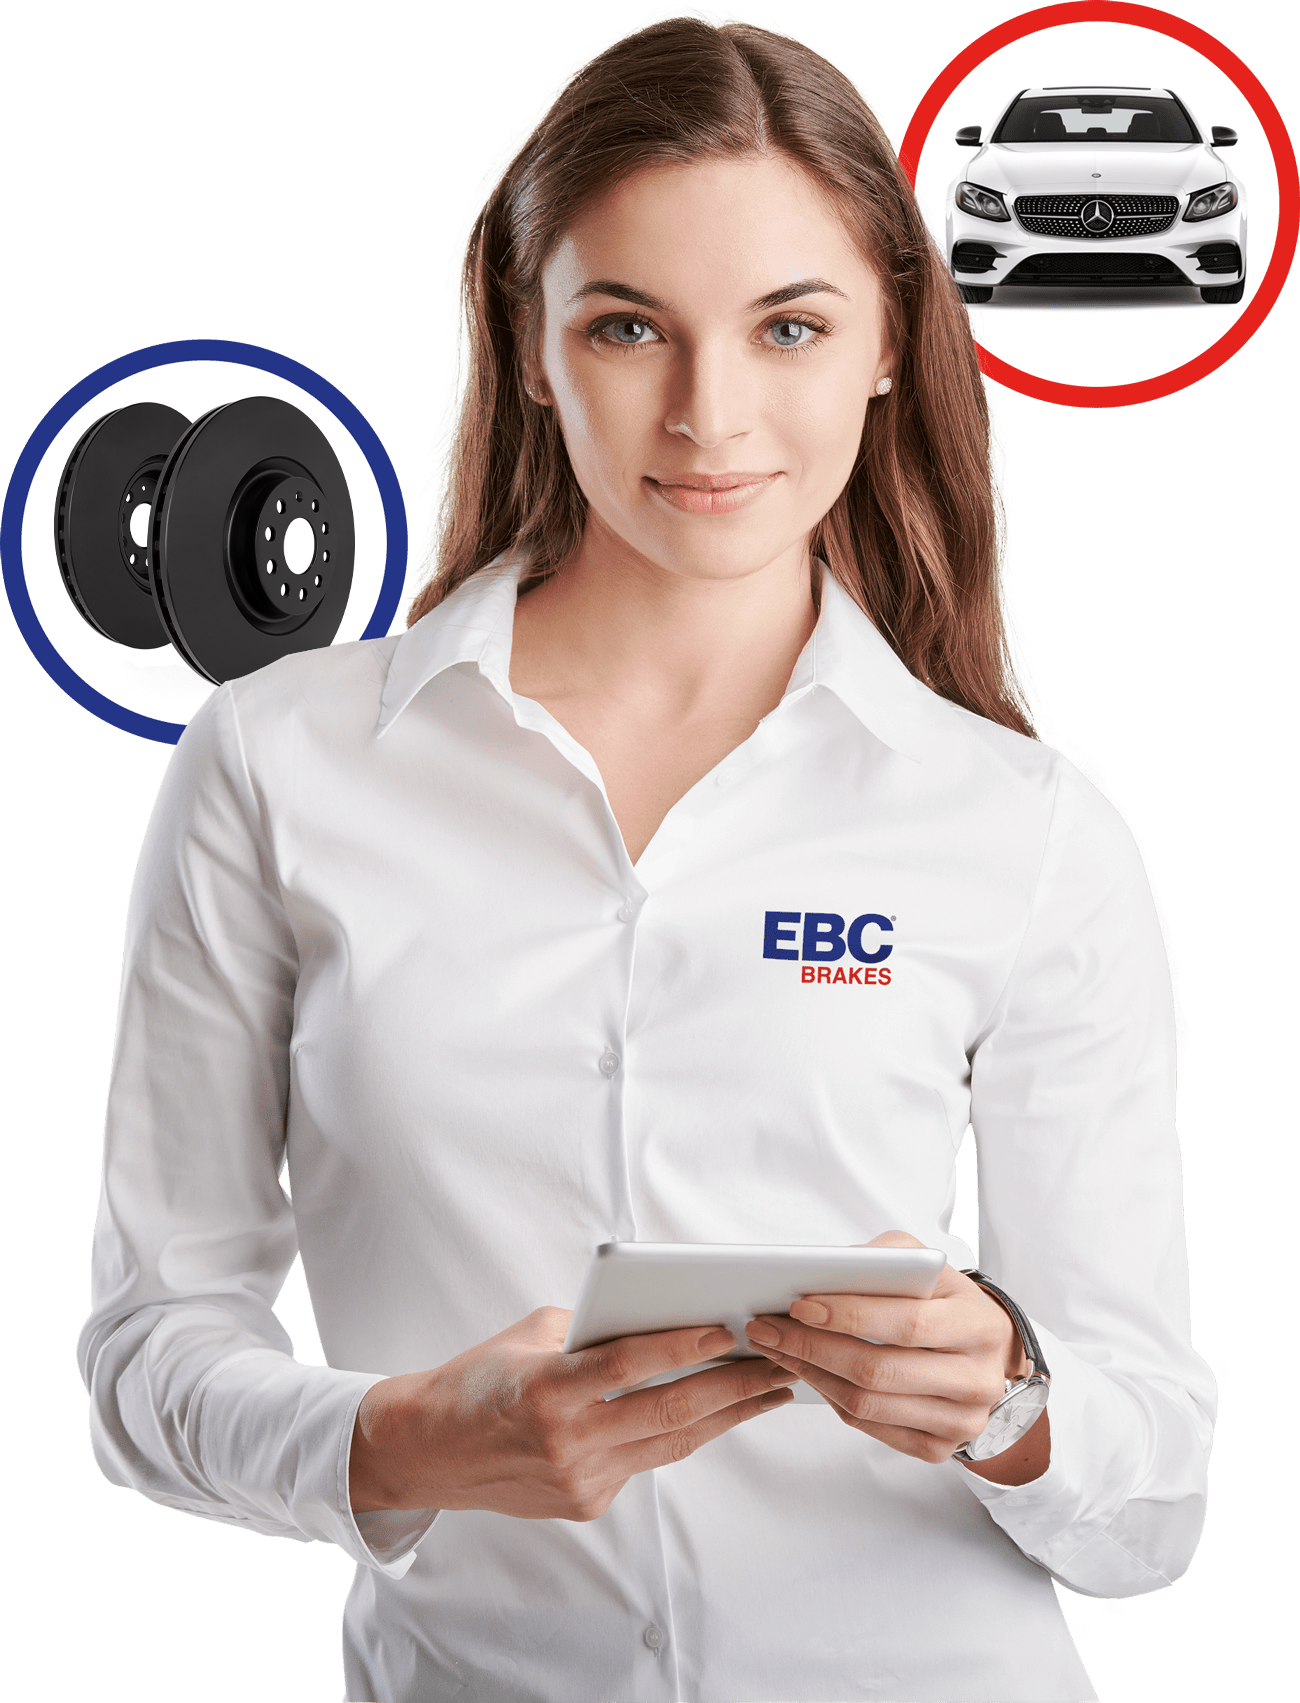 EBC Brakes - The World's Leading High Performance Brake Specialists